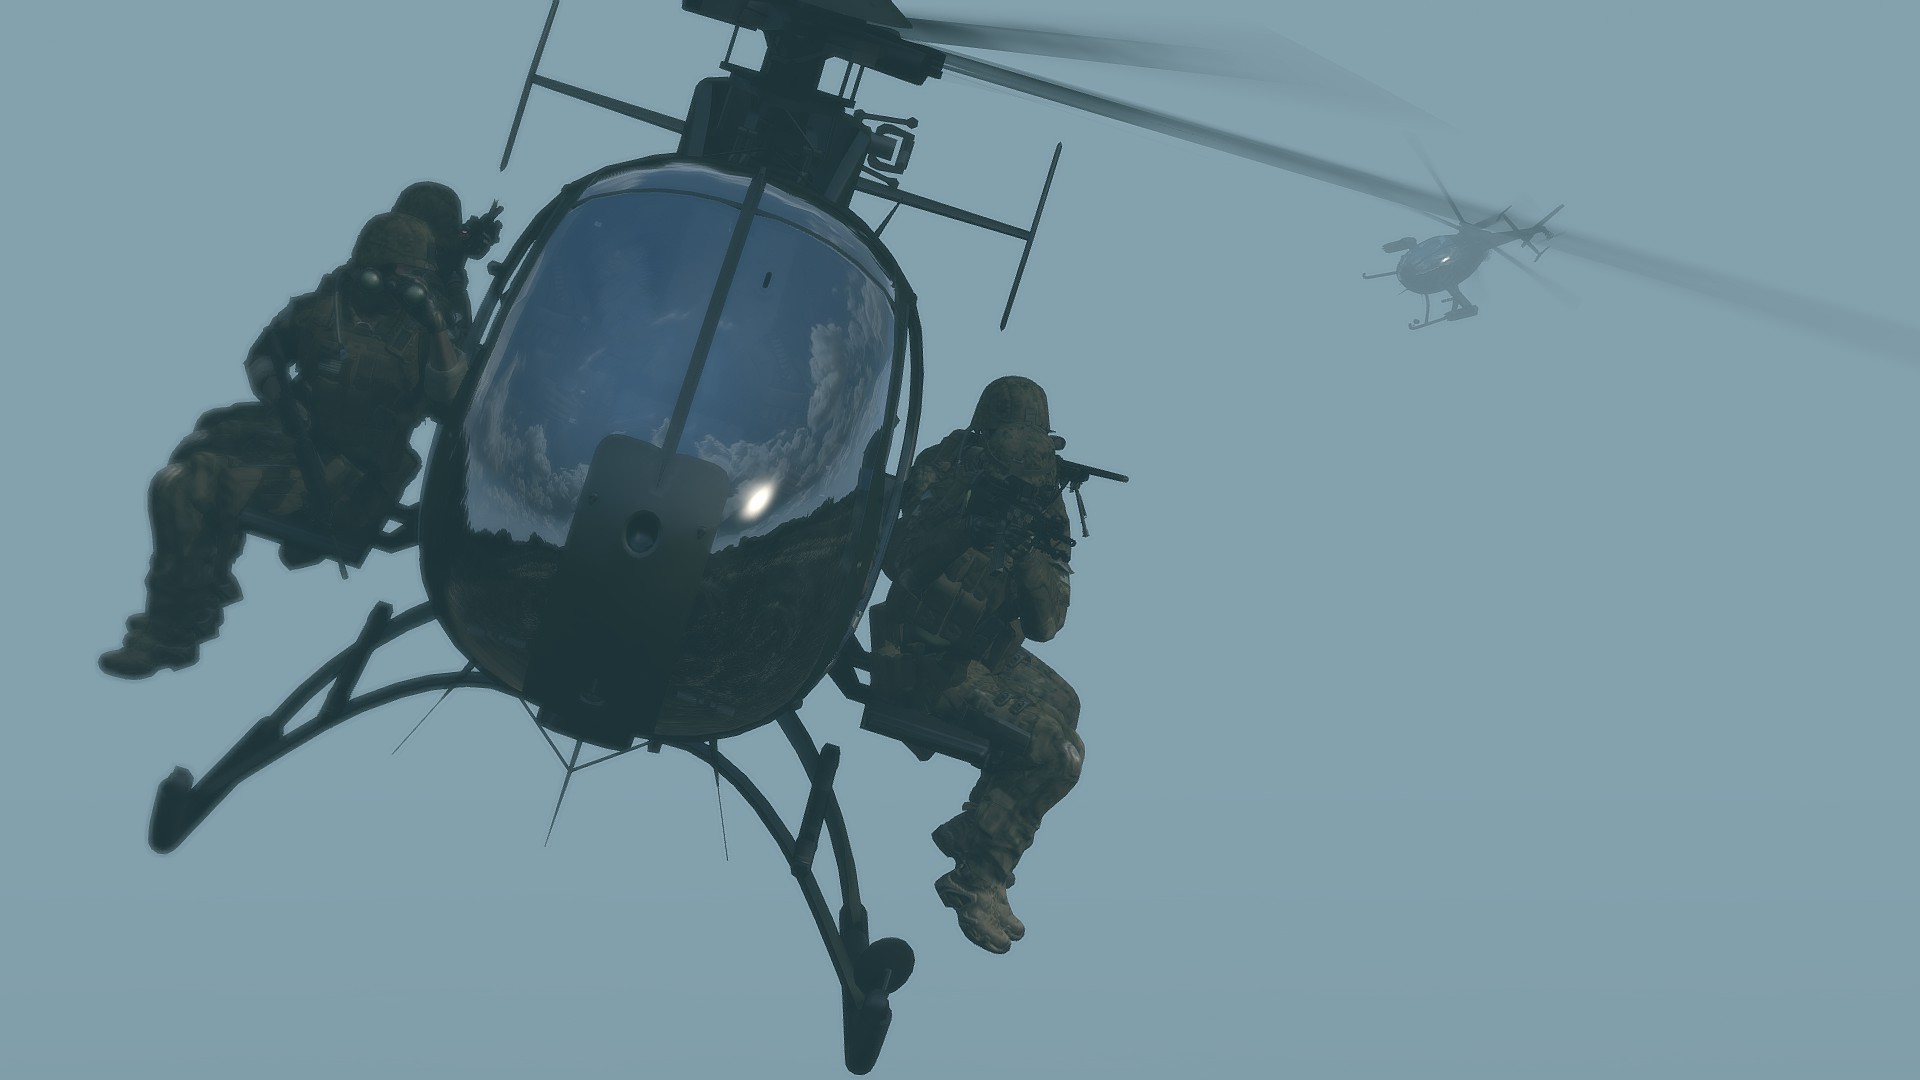 General 1920x1080 Arma 3 helicopters video games frontal view PC gaming screen shot vehicle